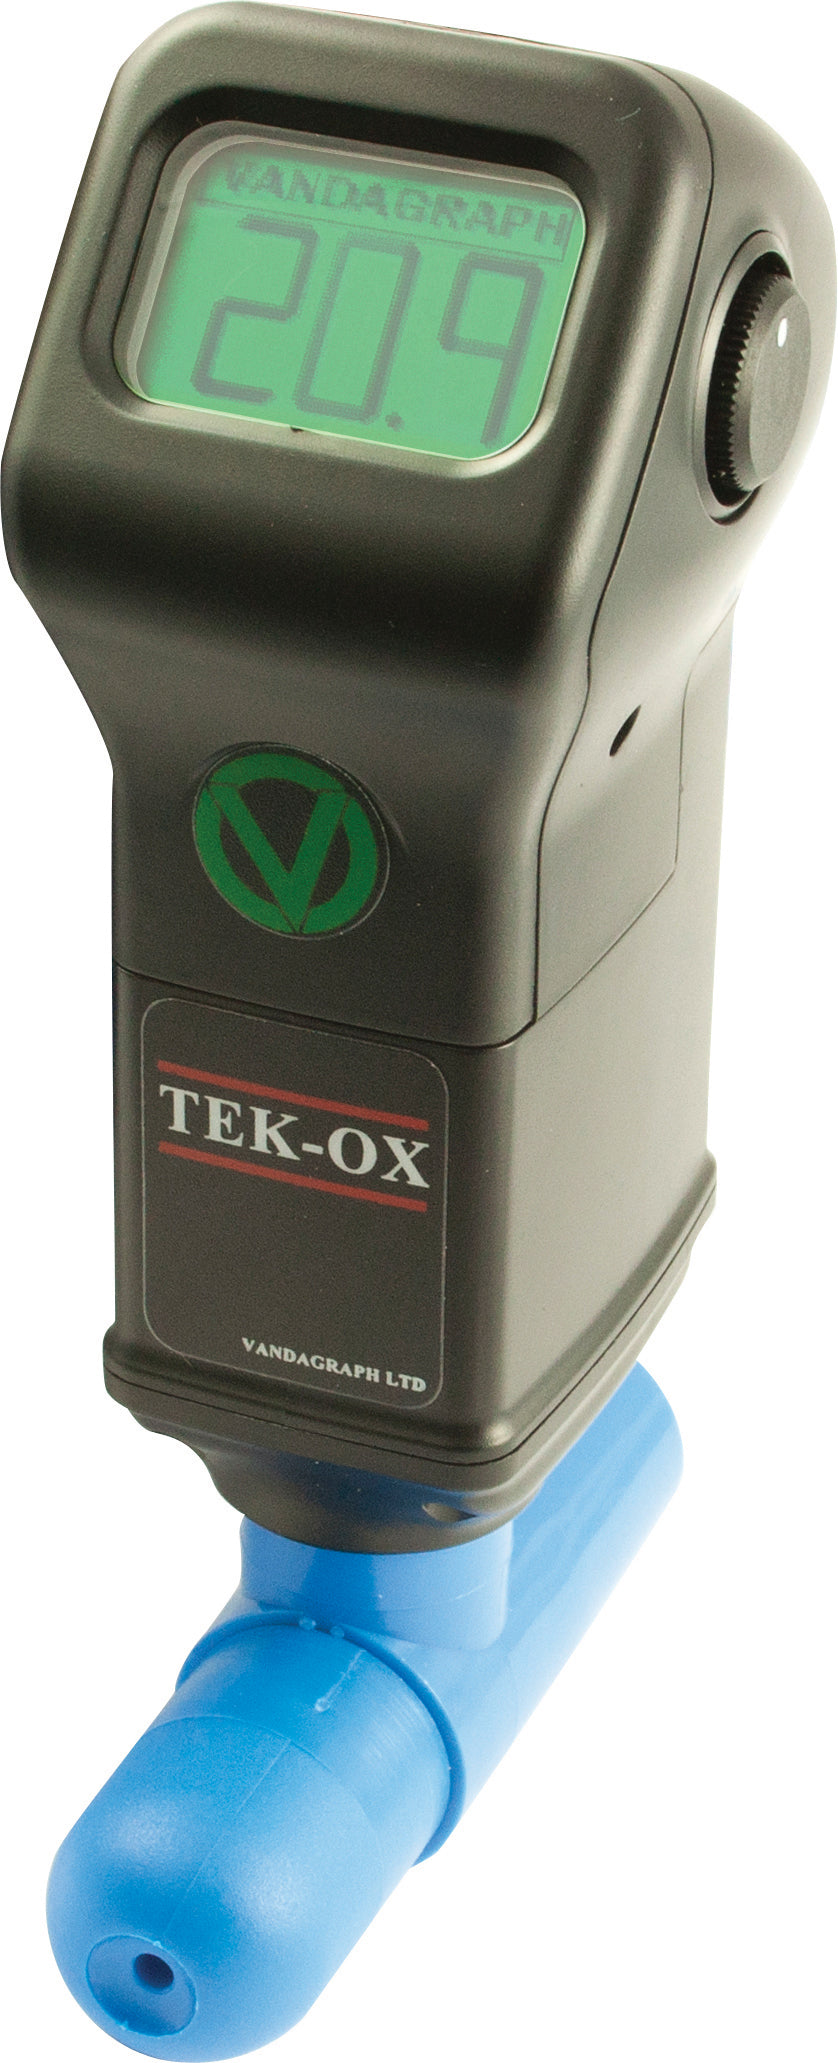 Tek-Ox with Quick Ox (Auto Switch-Off) (7910201)